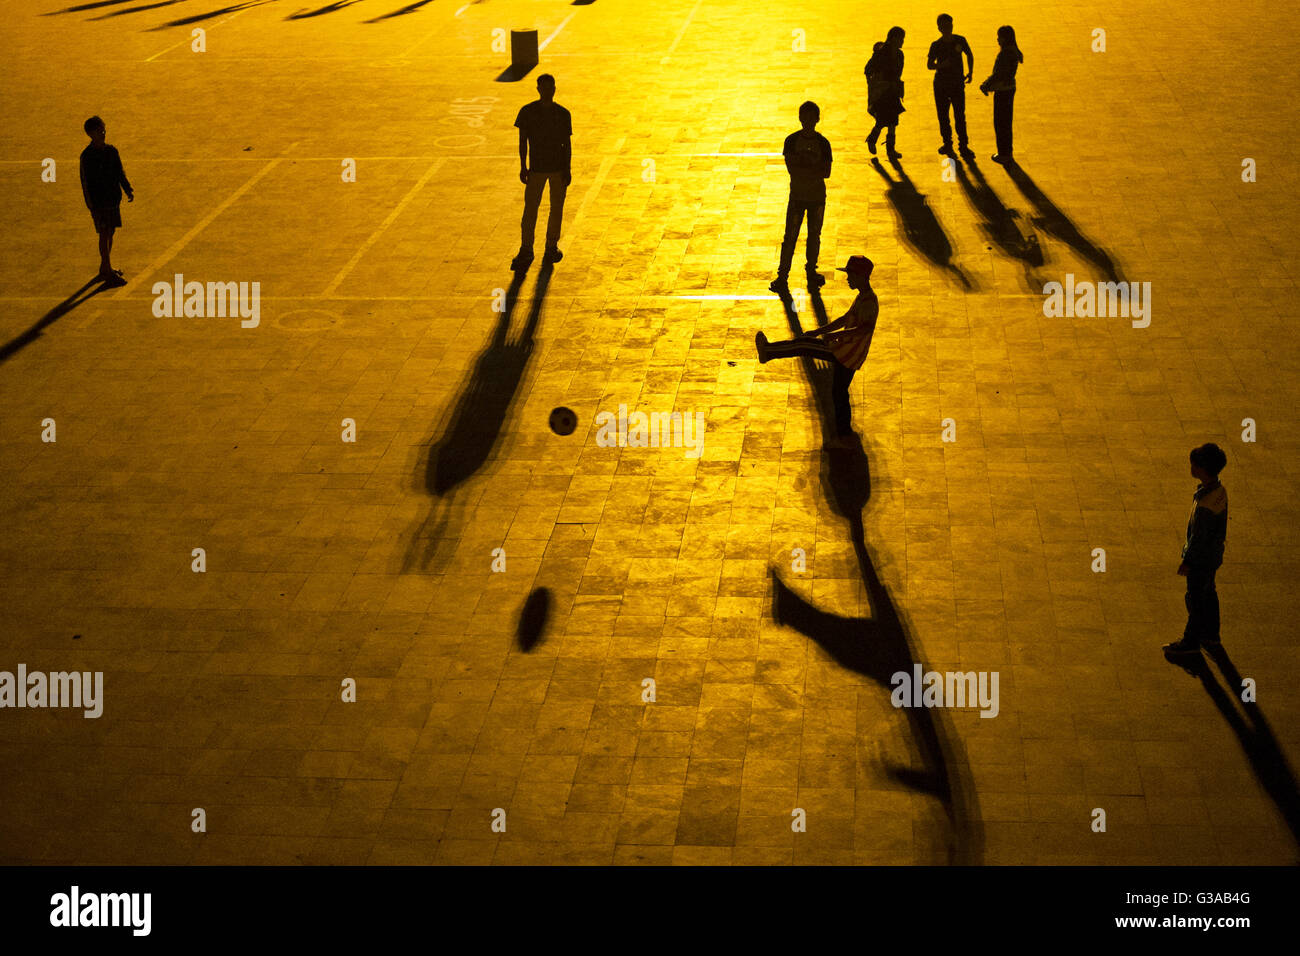 Young people play soccer at night on the Quang Truong square in Sapa, Lao Cai province, Vietnam Stock Photo